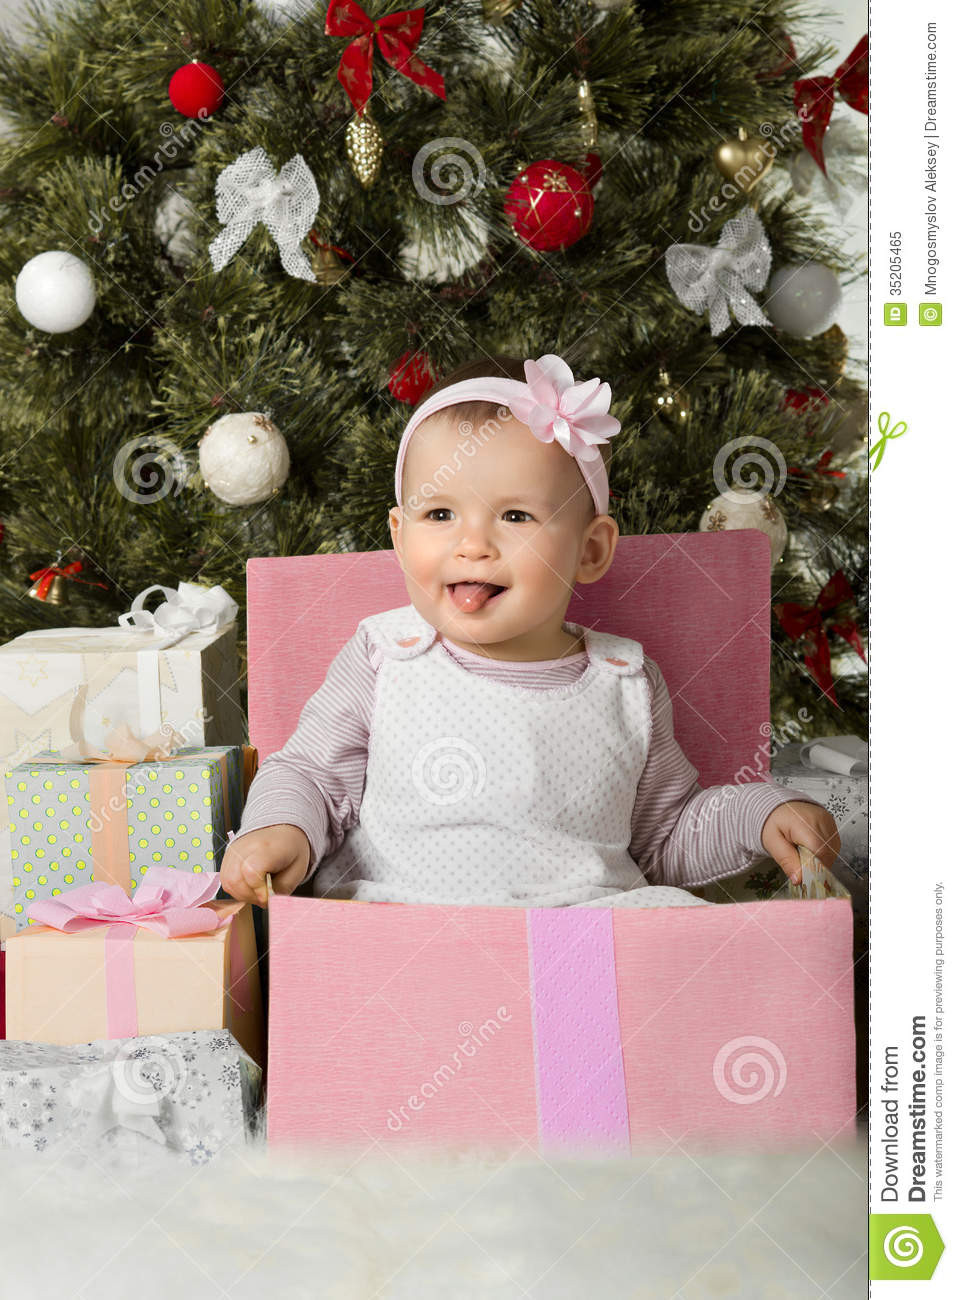 Christmas Gift Ideas For 1 Year Old Baby Girl
 Christmas and baby girl stock image Image of oneyearold